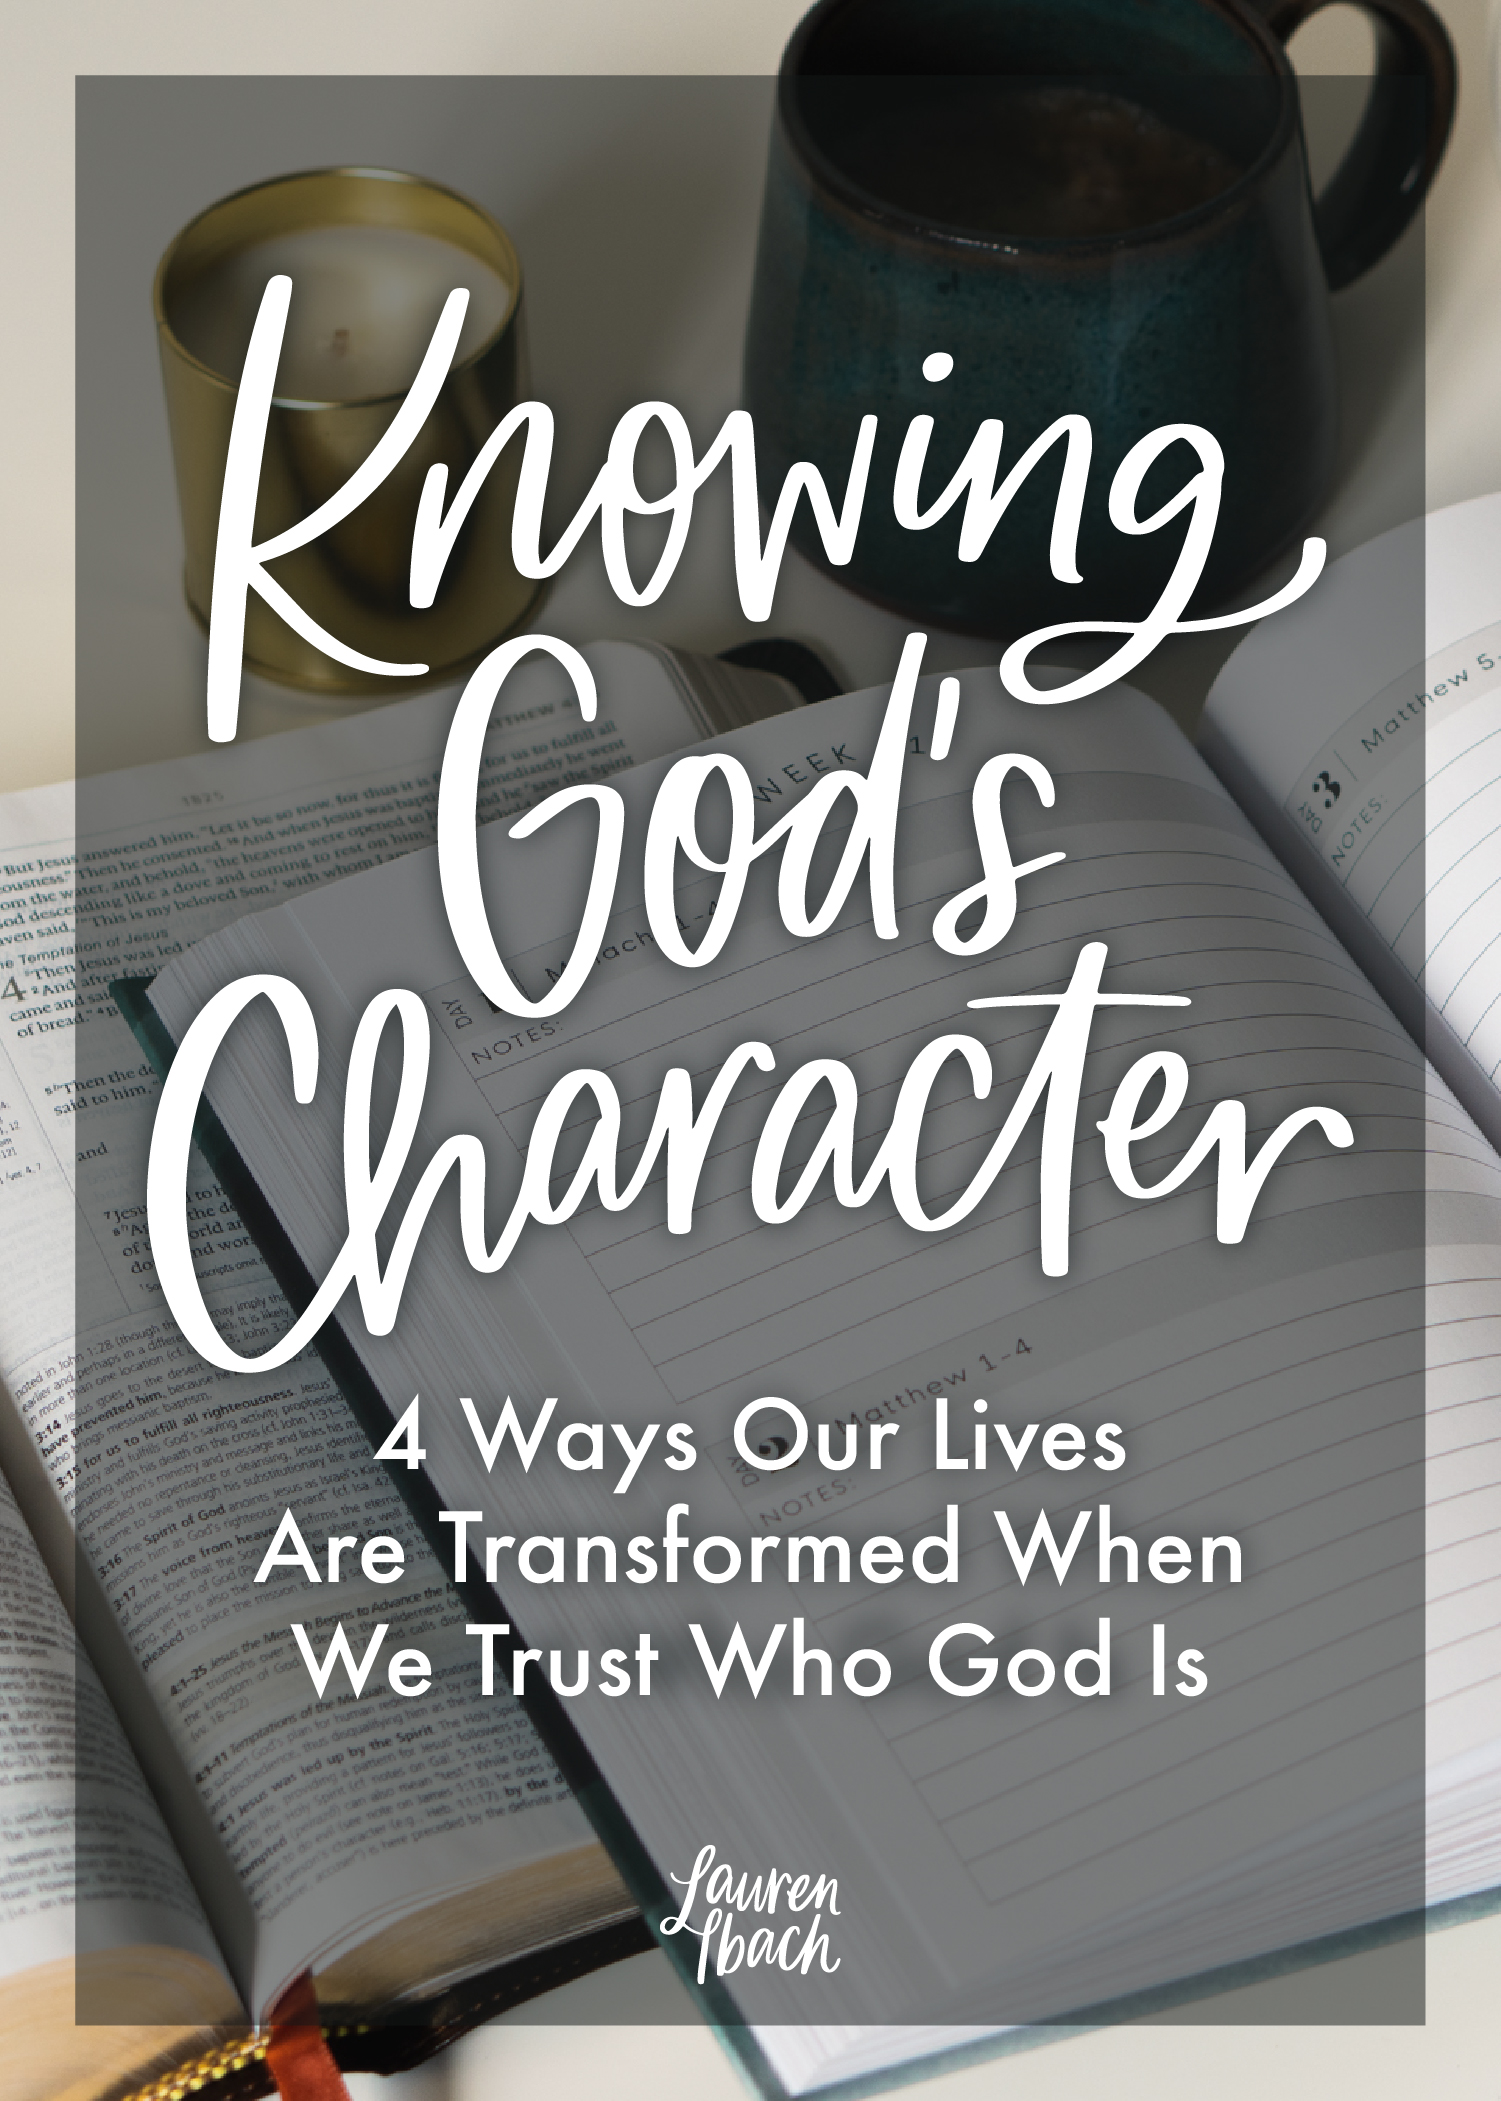 Knowing God's Character - 01